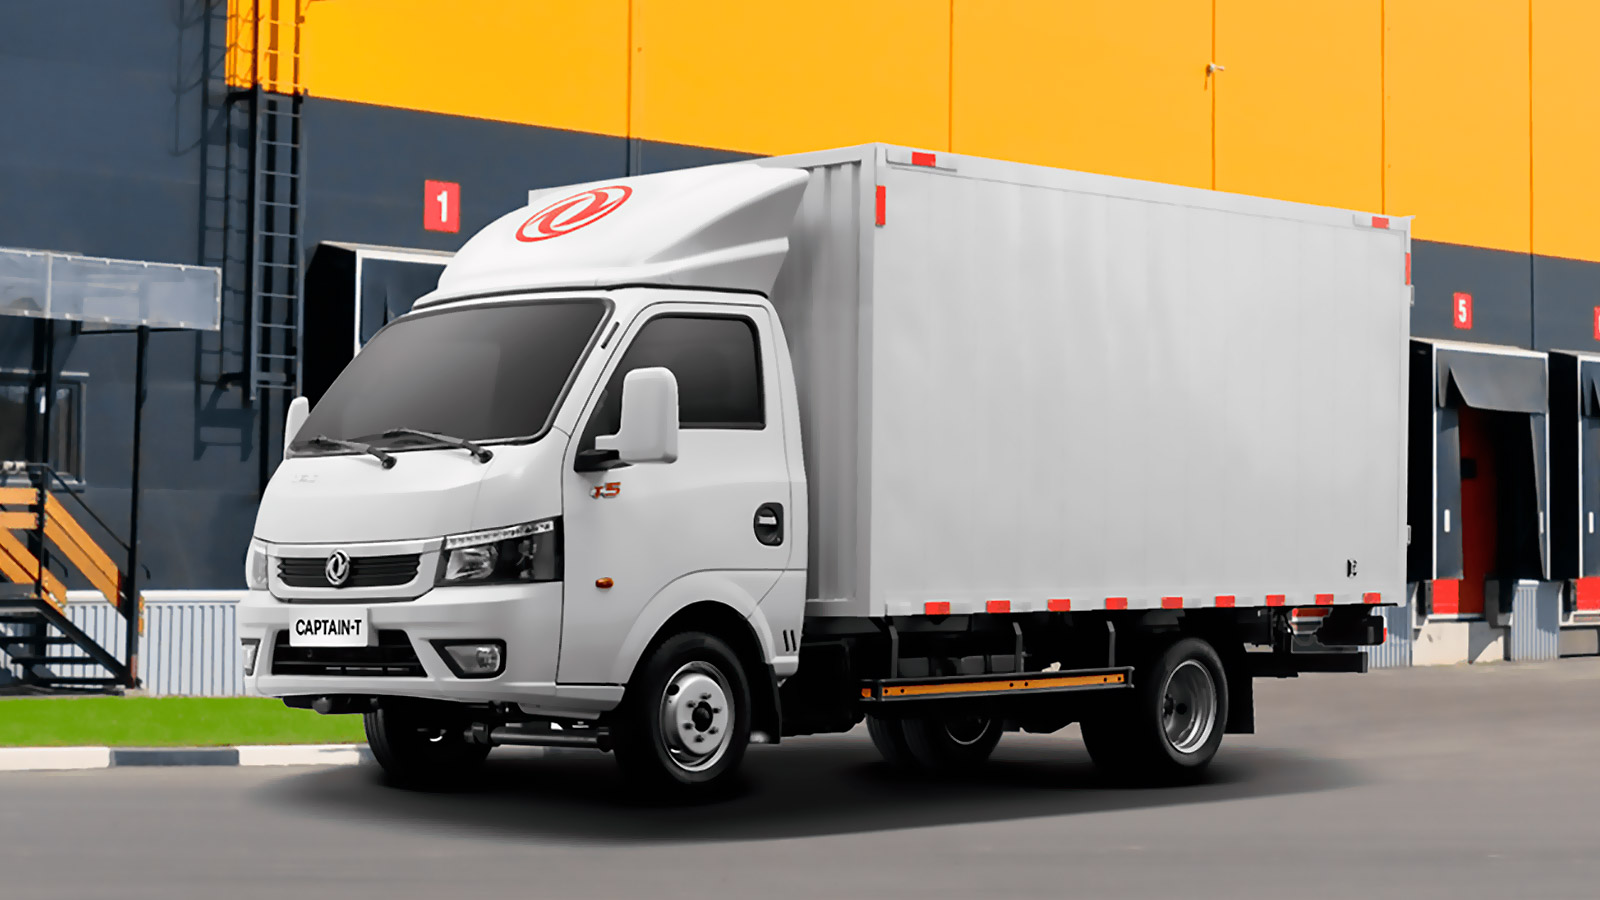 dongfeng captain – t 